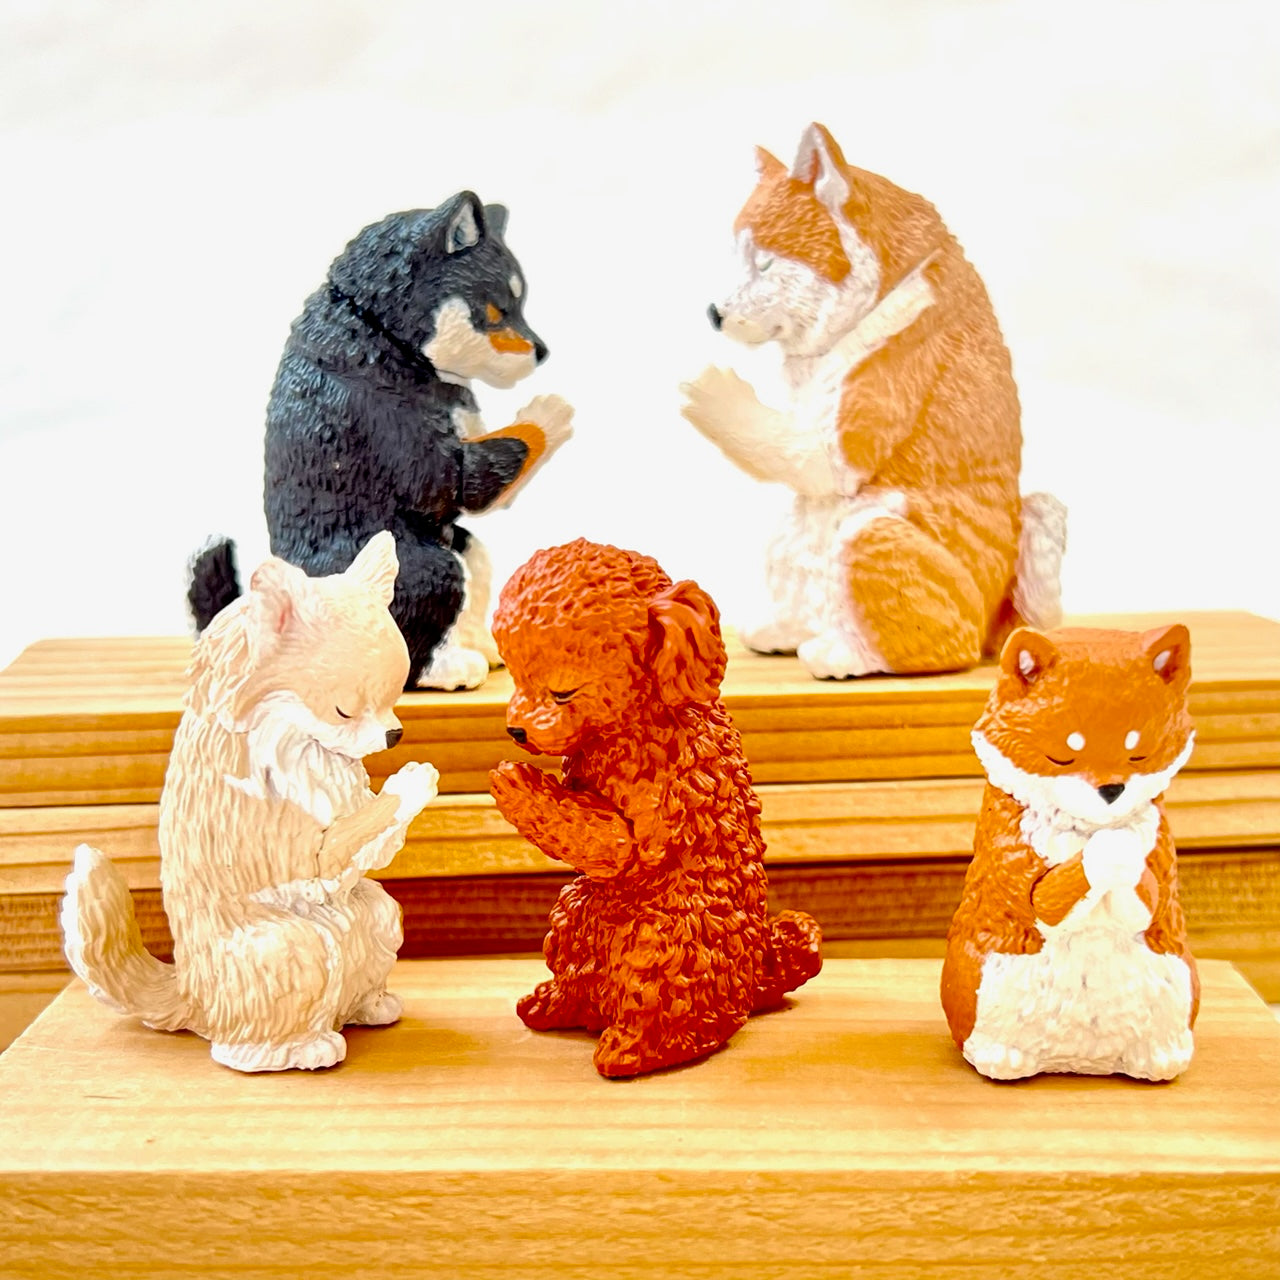 70756 BOWING PUPPY DOG BLIND BOX-10